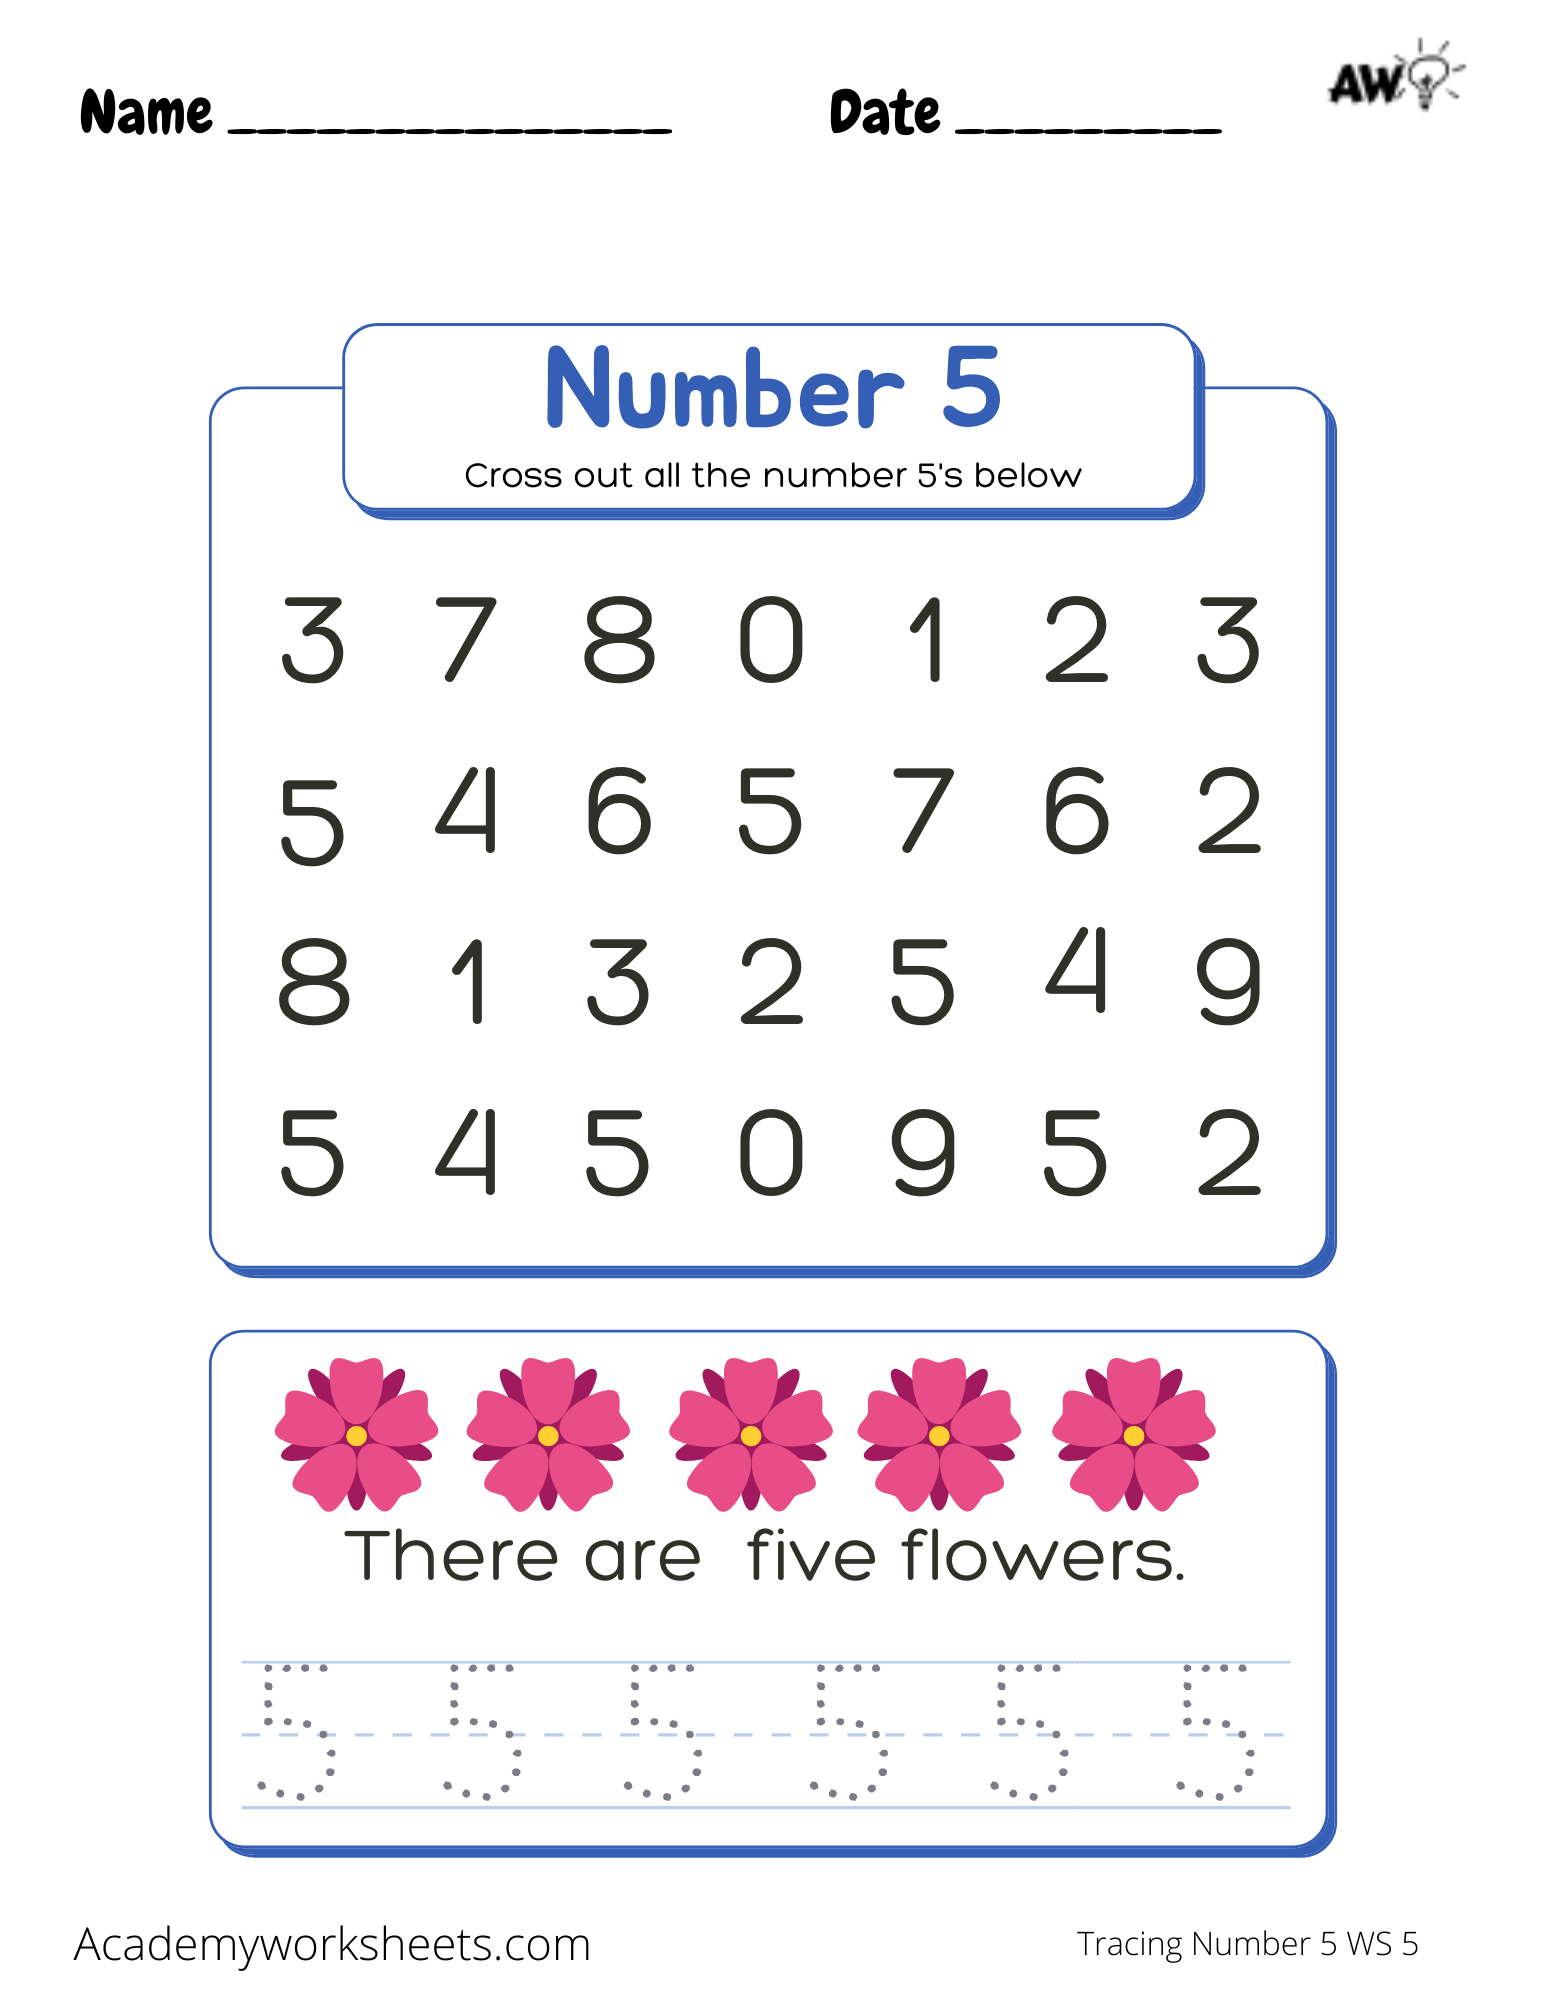 the-number-5-tracing-academy-worksheets